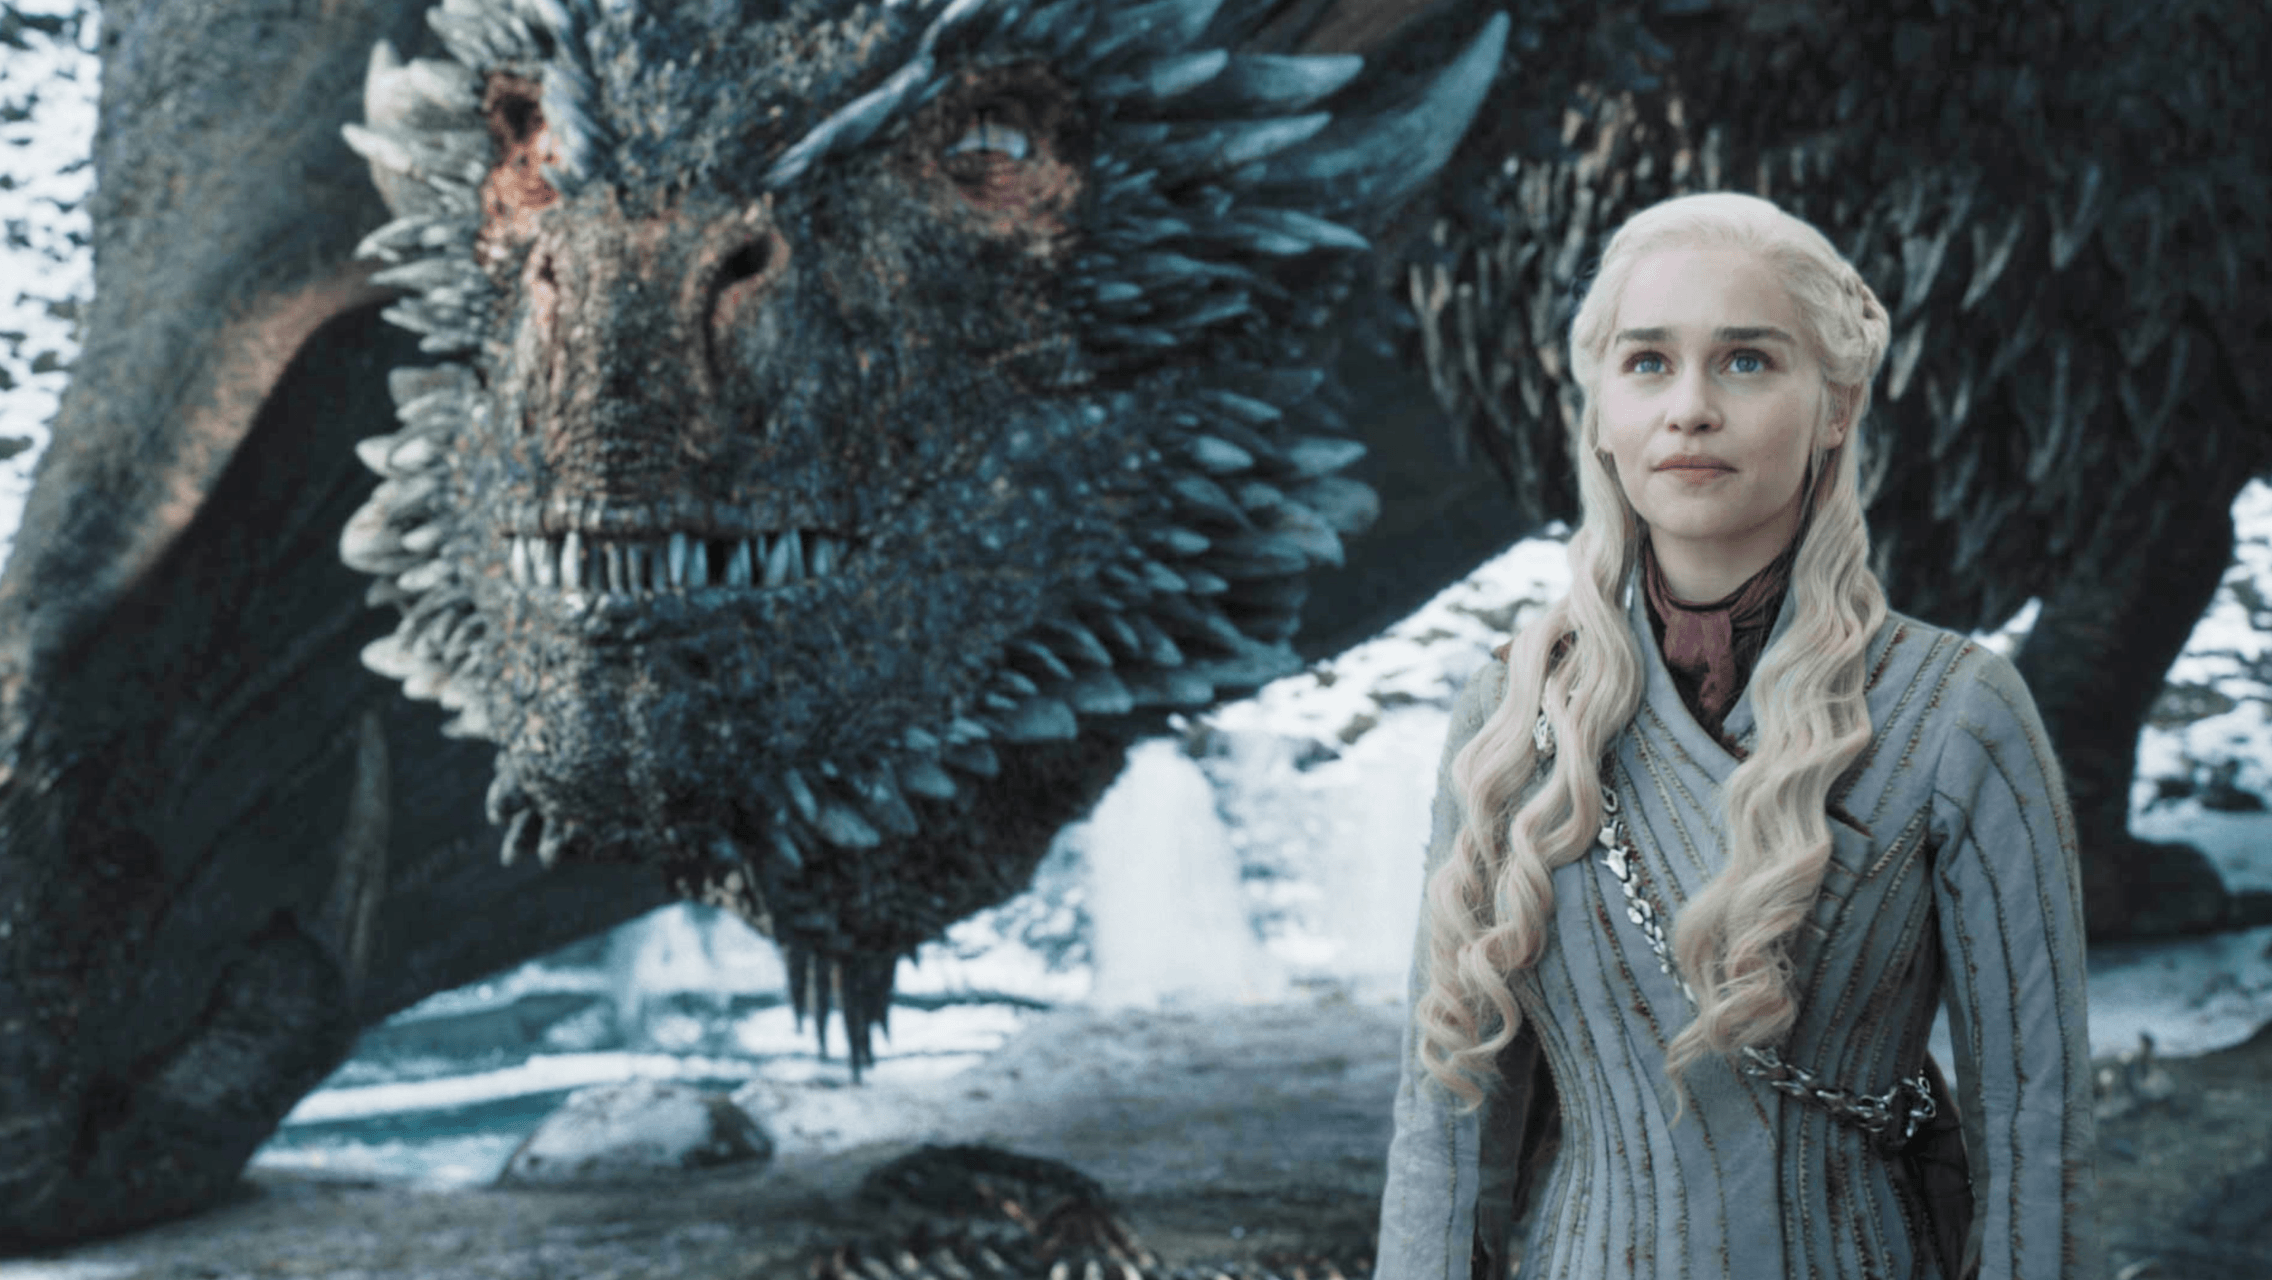 Game of Thrones 4K Blu-Ray Box Set on the Way